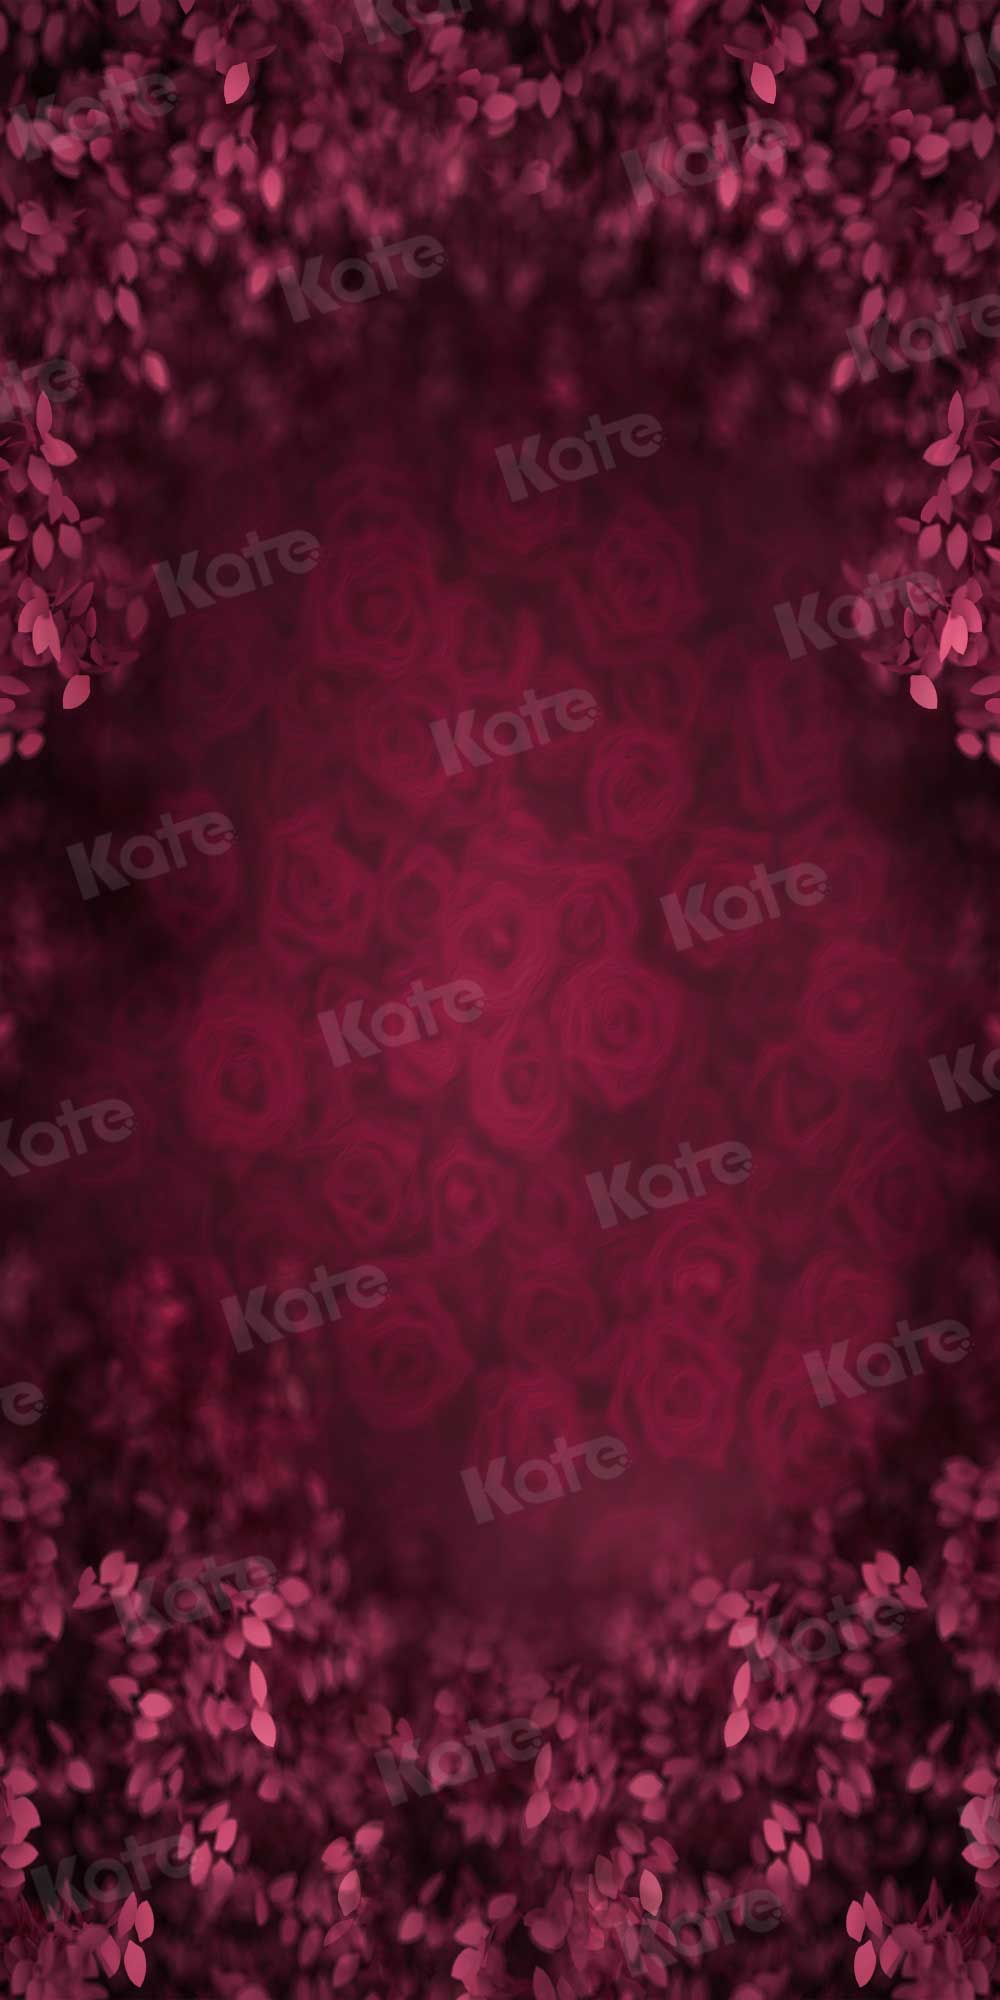 Kate Valentine's Day Backdrop Floral Red for Photography